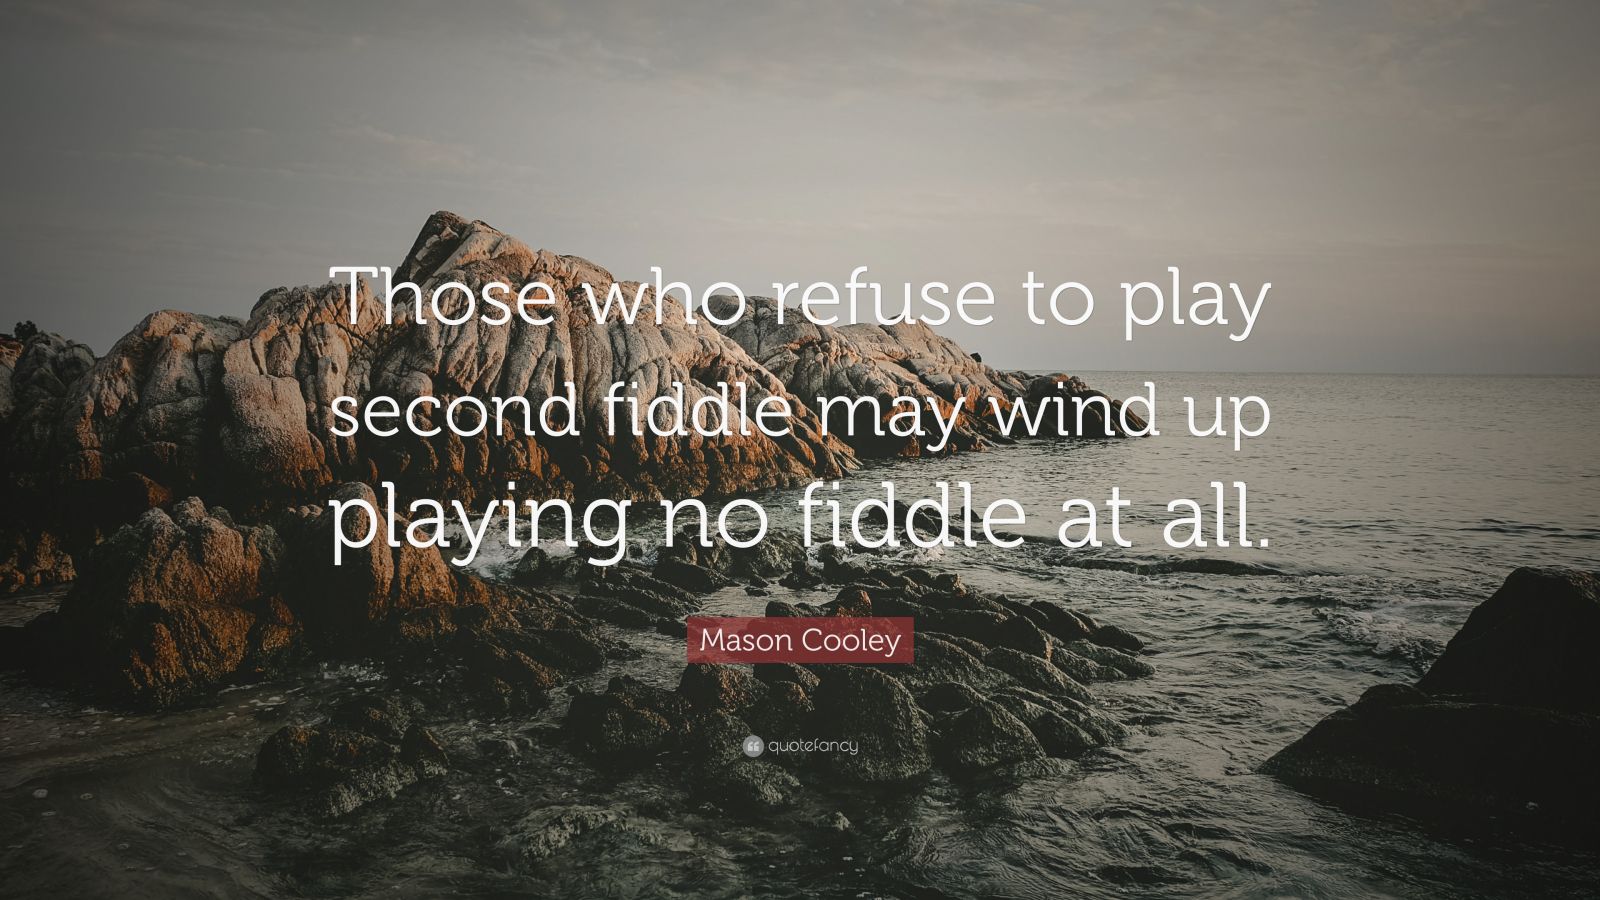 Mason cooley quote âthose who refuse to play second fiddle may wind up playing no fiddle at allâ